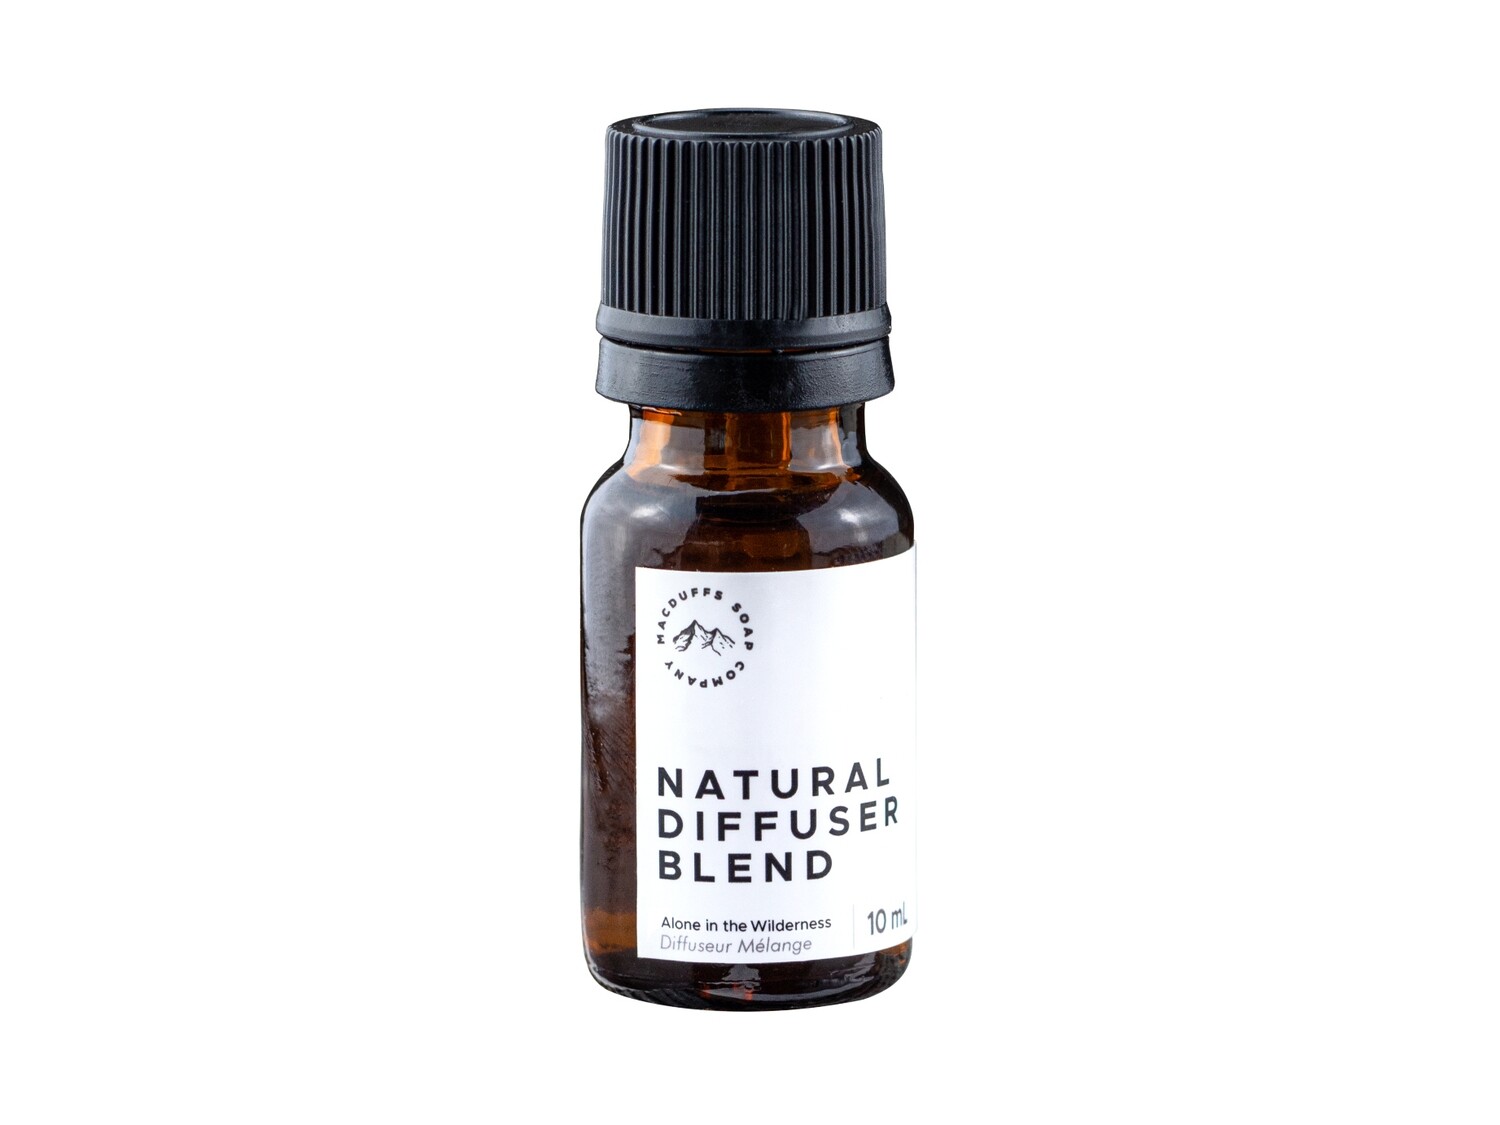 Alone in the Wilderness Diffuser Blend